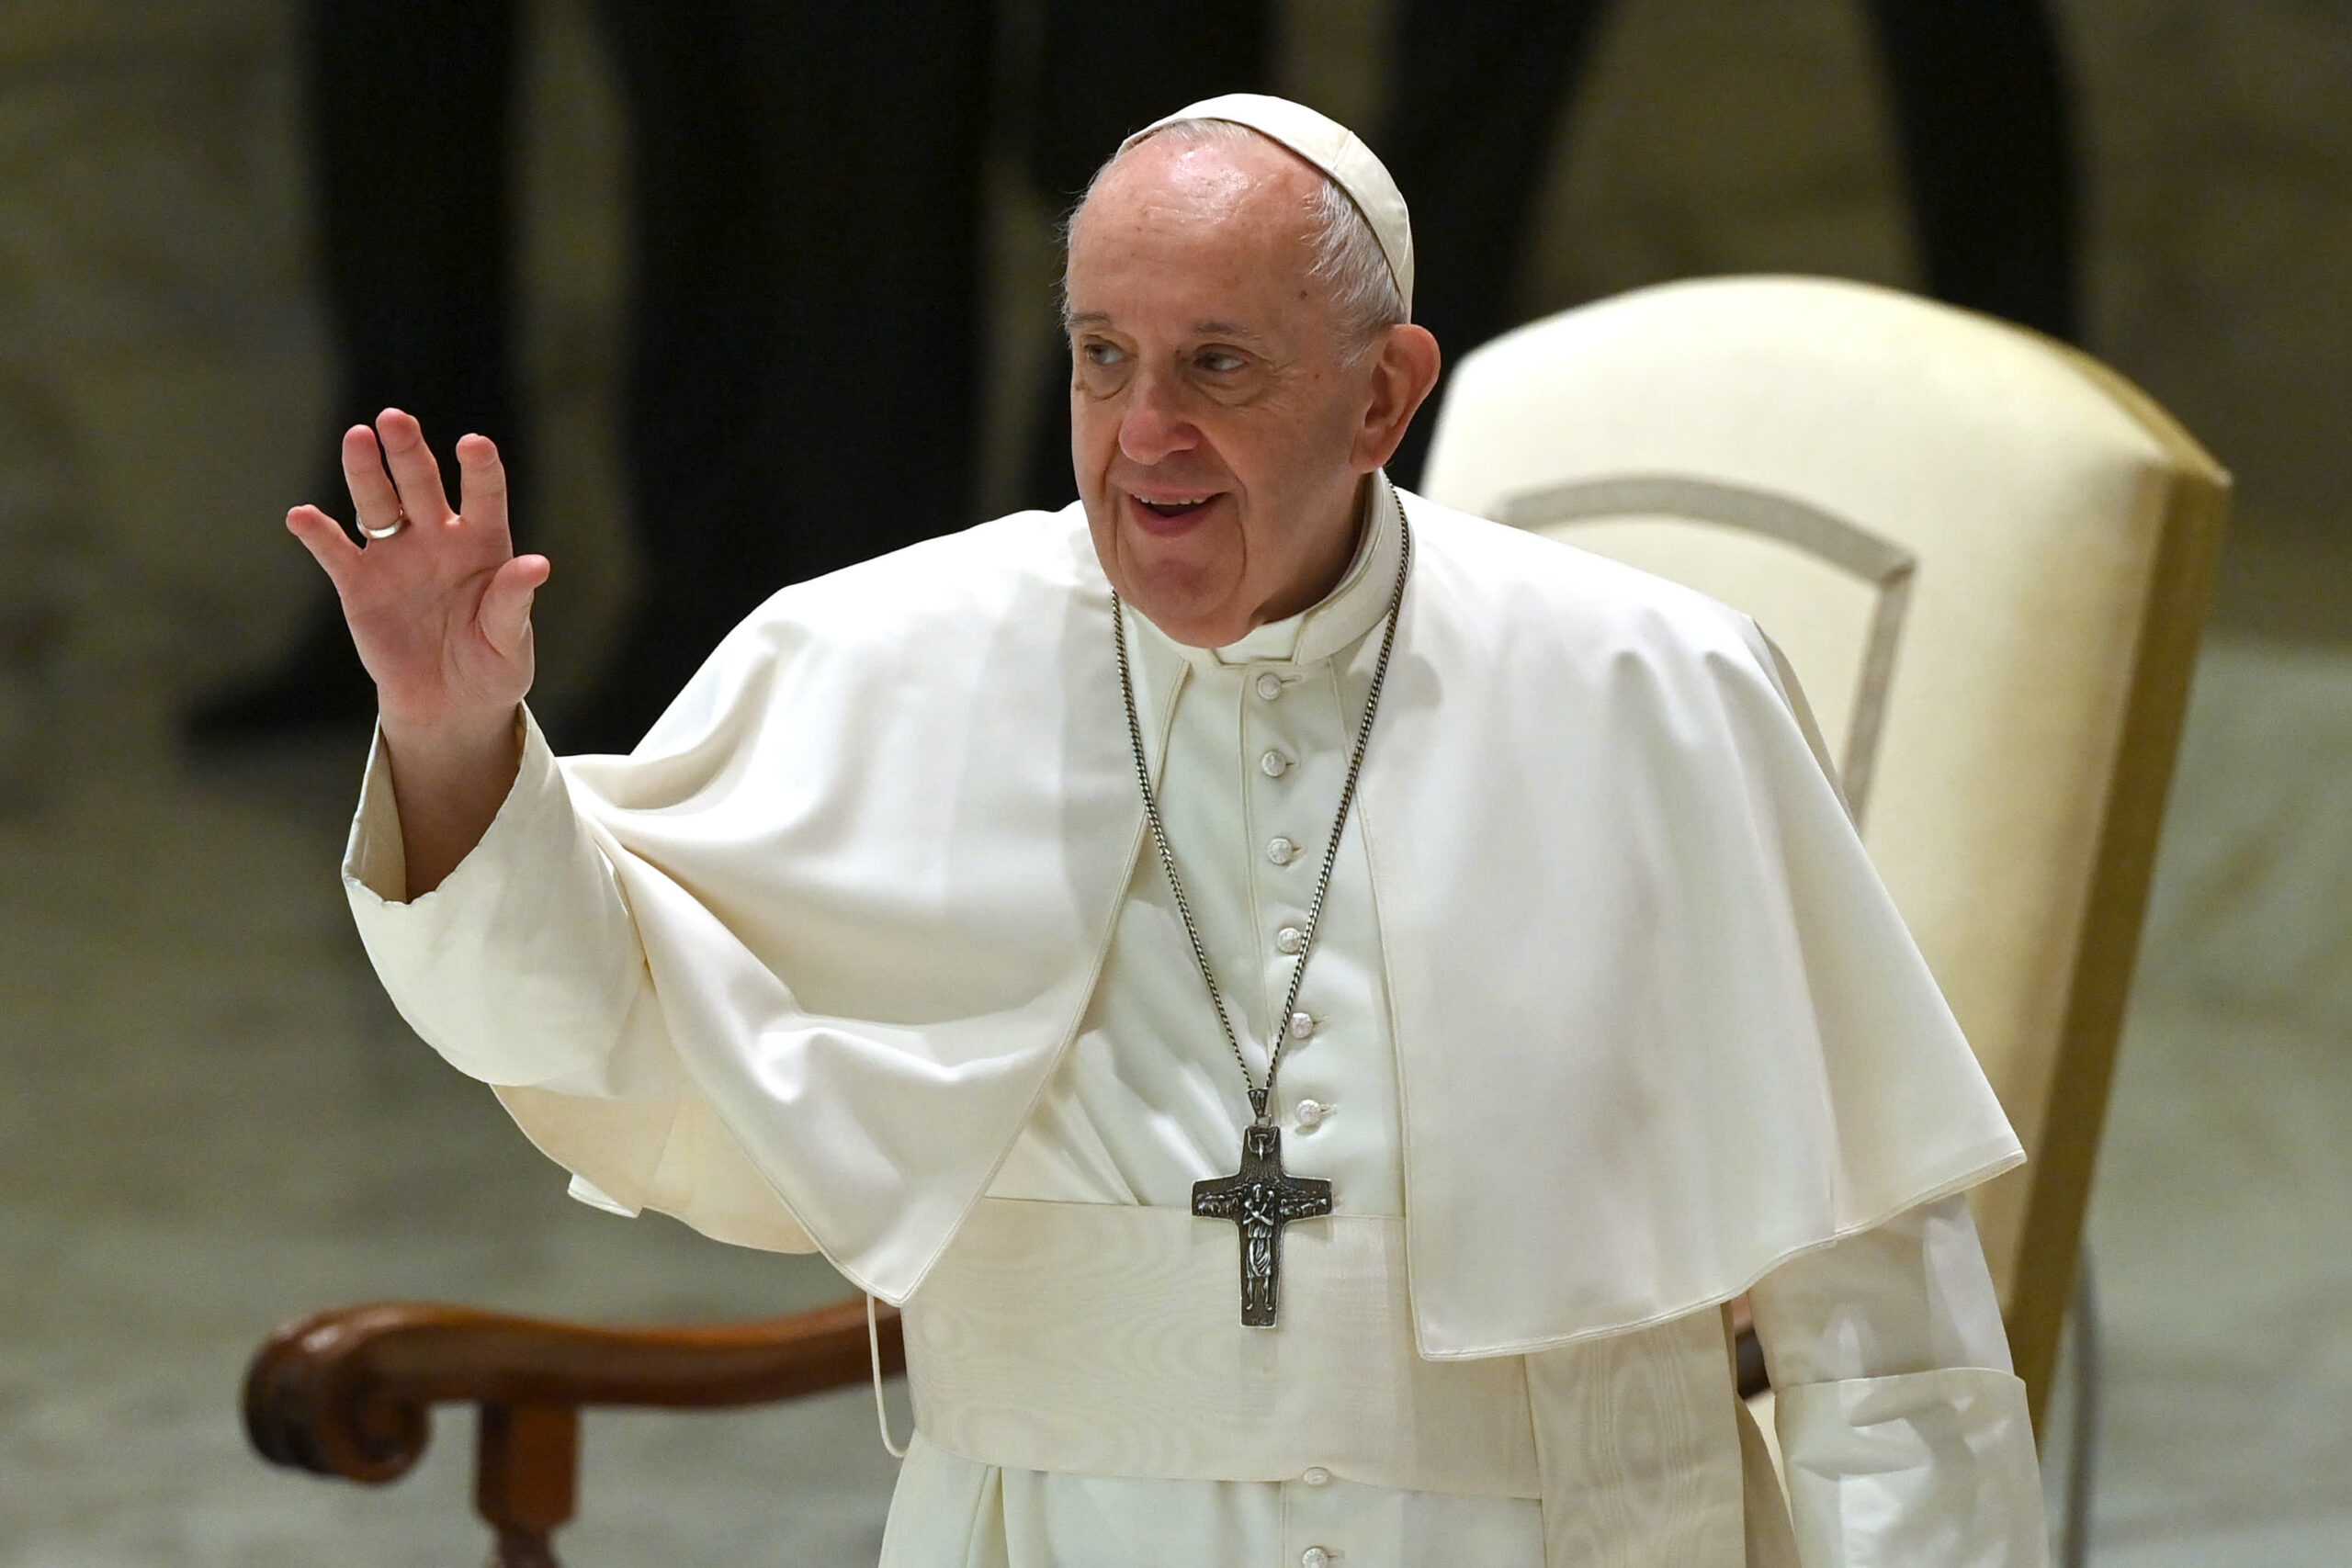 Pope Francis will endure colon surgical procedure in Rome hospital